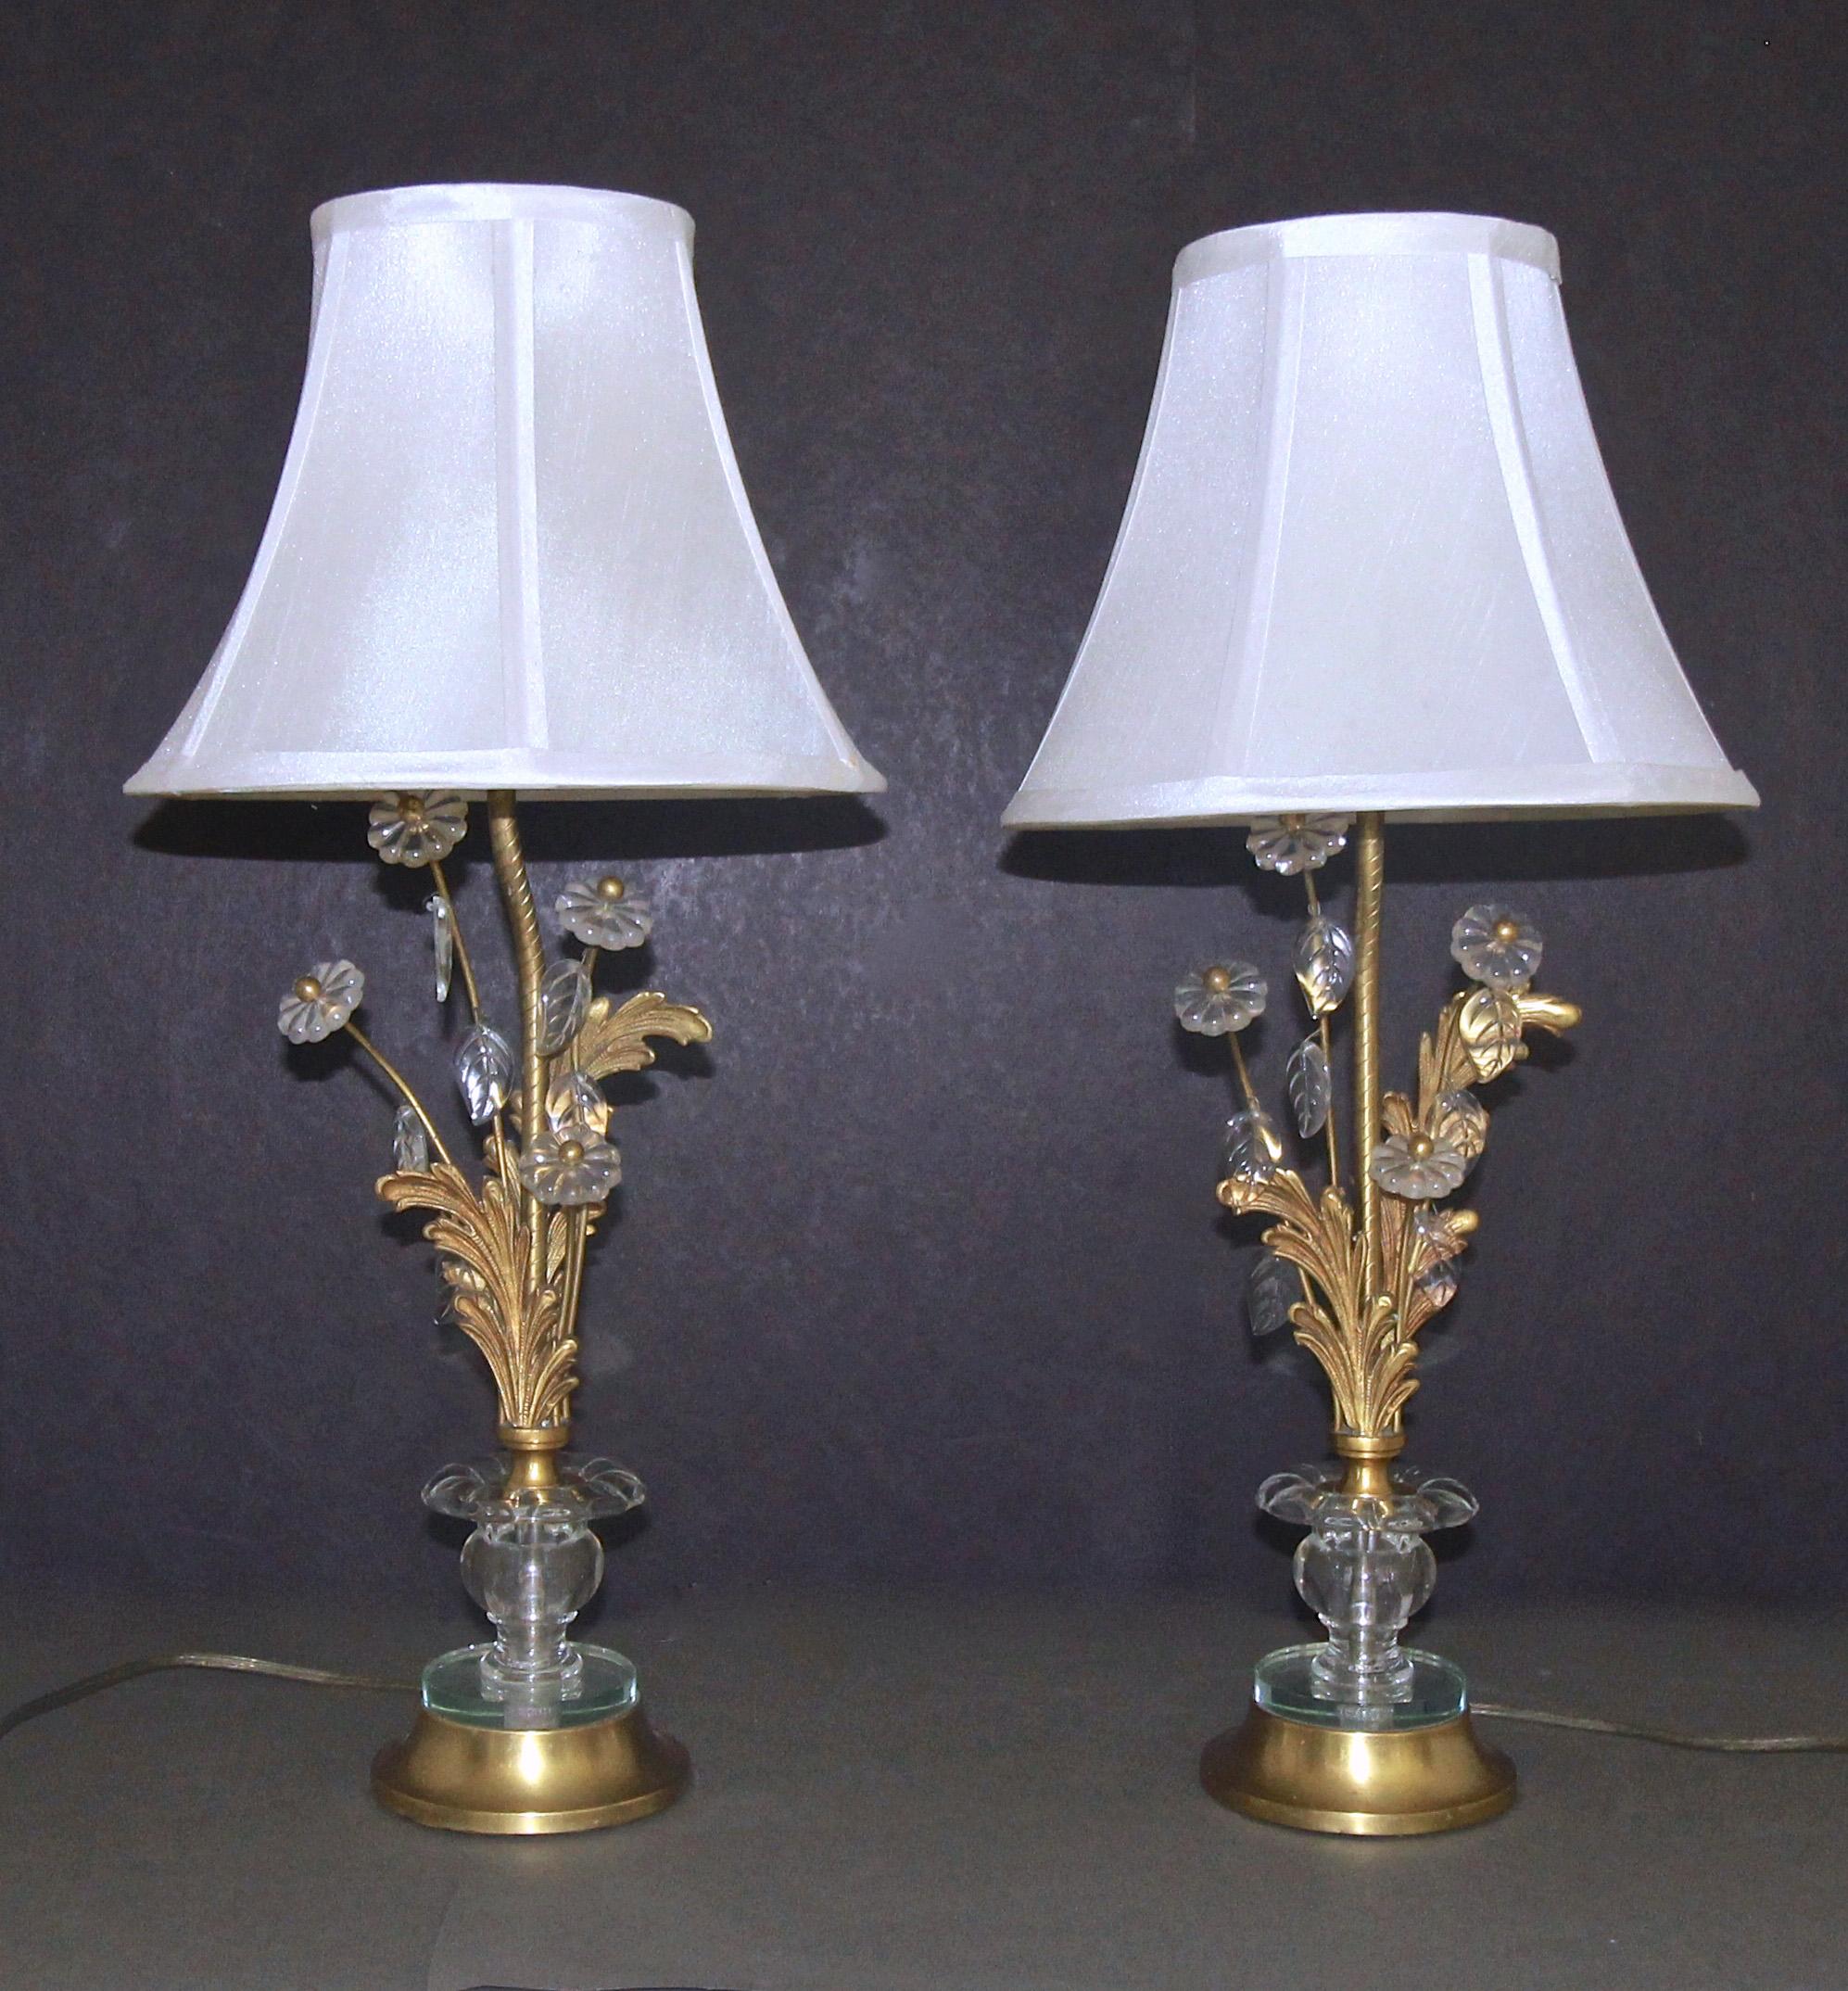 A pair of smaller scale French gilt bronze table or buffet lamps. Decorated with glass rosettes and leaves, and finely crafted foliate embellishments. Base is gilt metal and mirrored glass. Each light uses regular A base bulb. Attributed in Maison